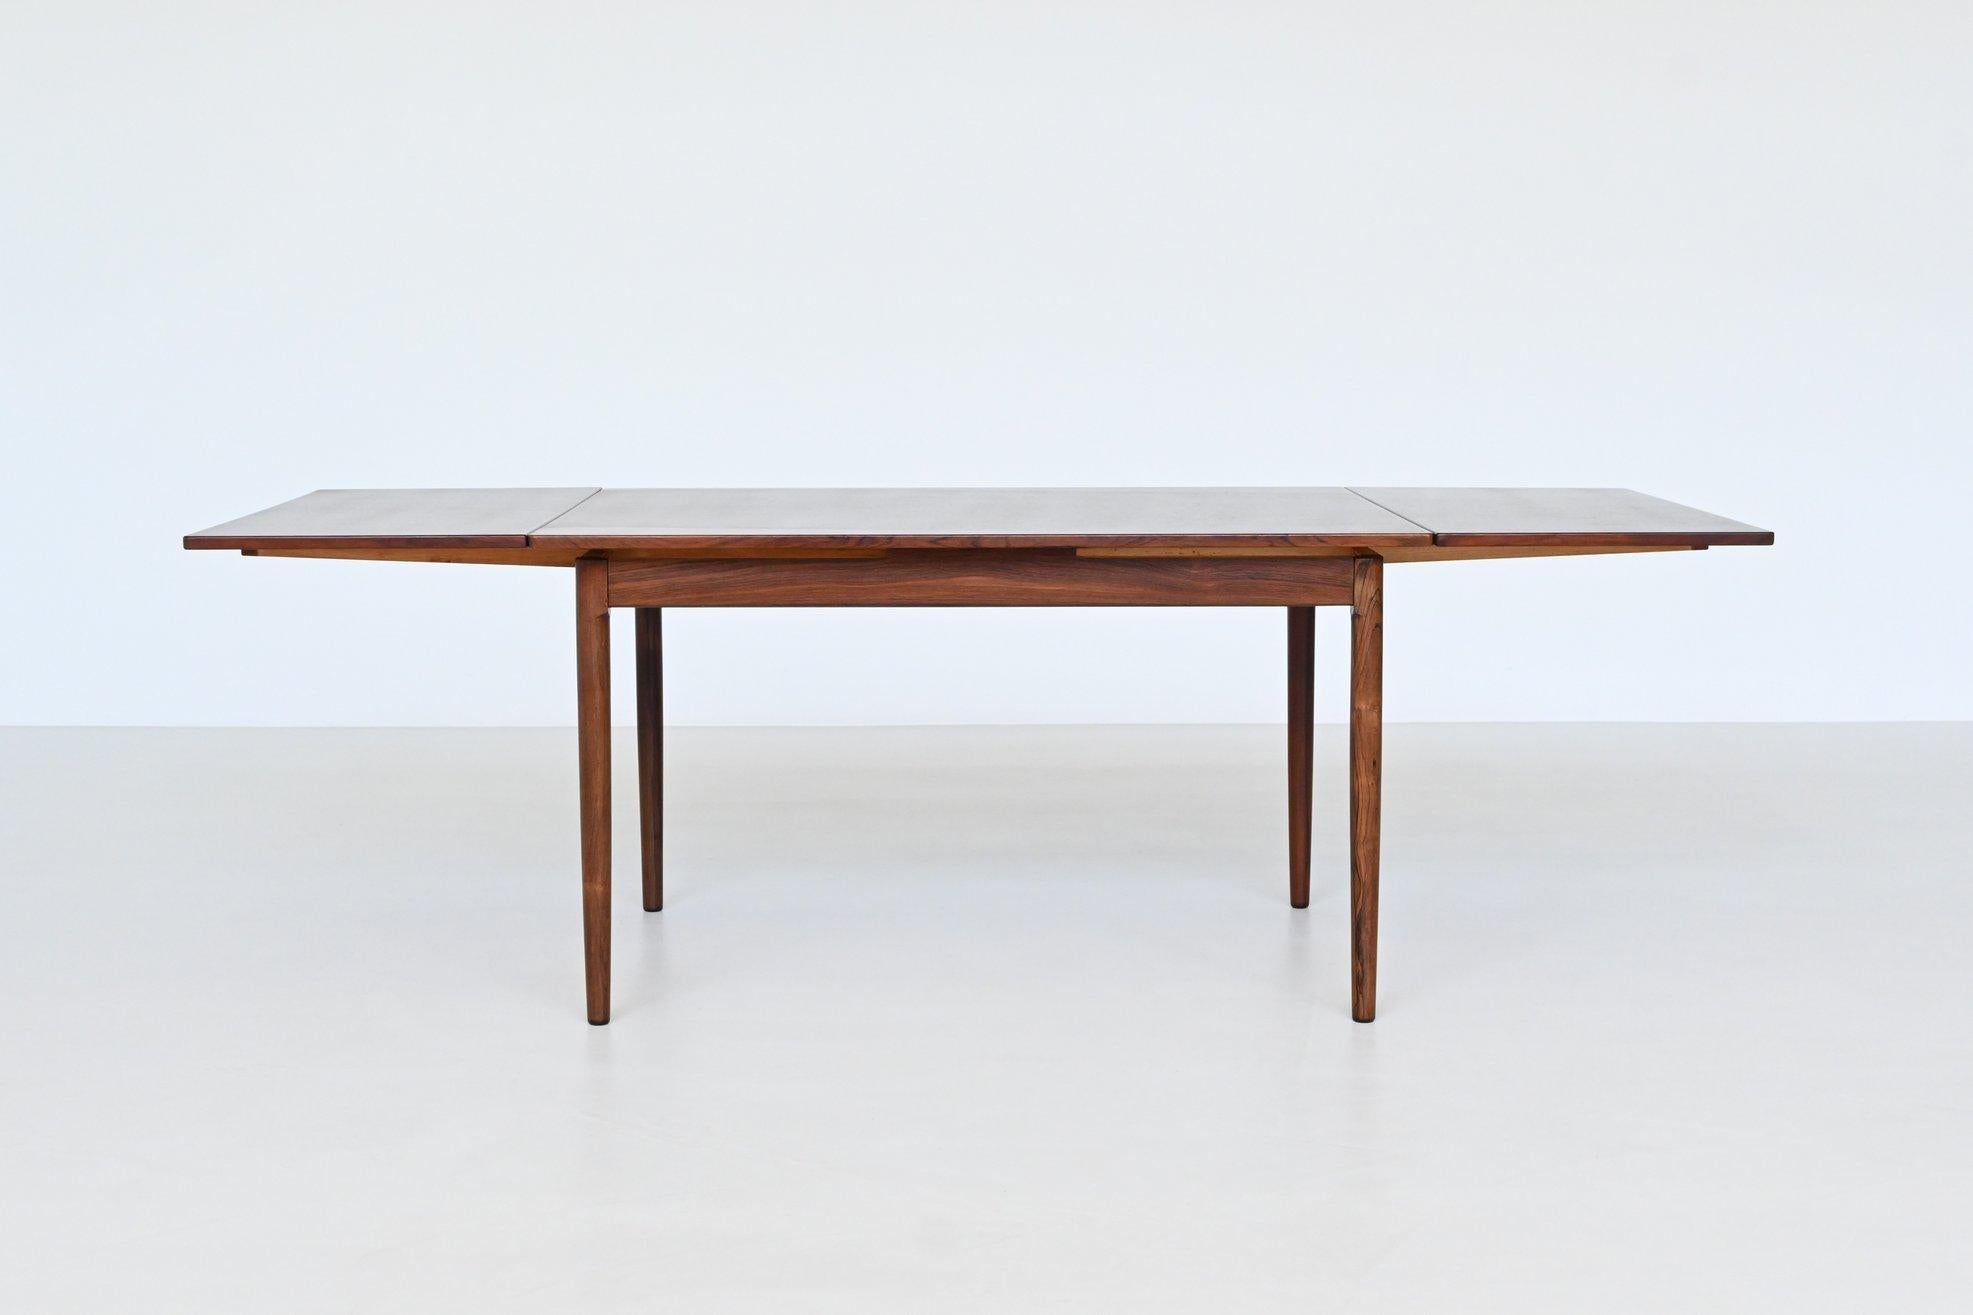 Beautiful oval shaped extendable dining table designed and manufactured by Randers Mobelfabrik, Denmark 1960. This well-crafted table is made of beautiful grained and warm rosewood. The tapered legs are made of solid rosewood and could be dismantled